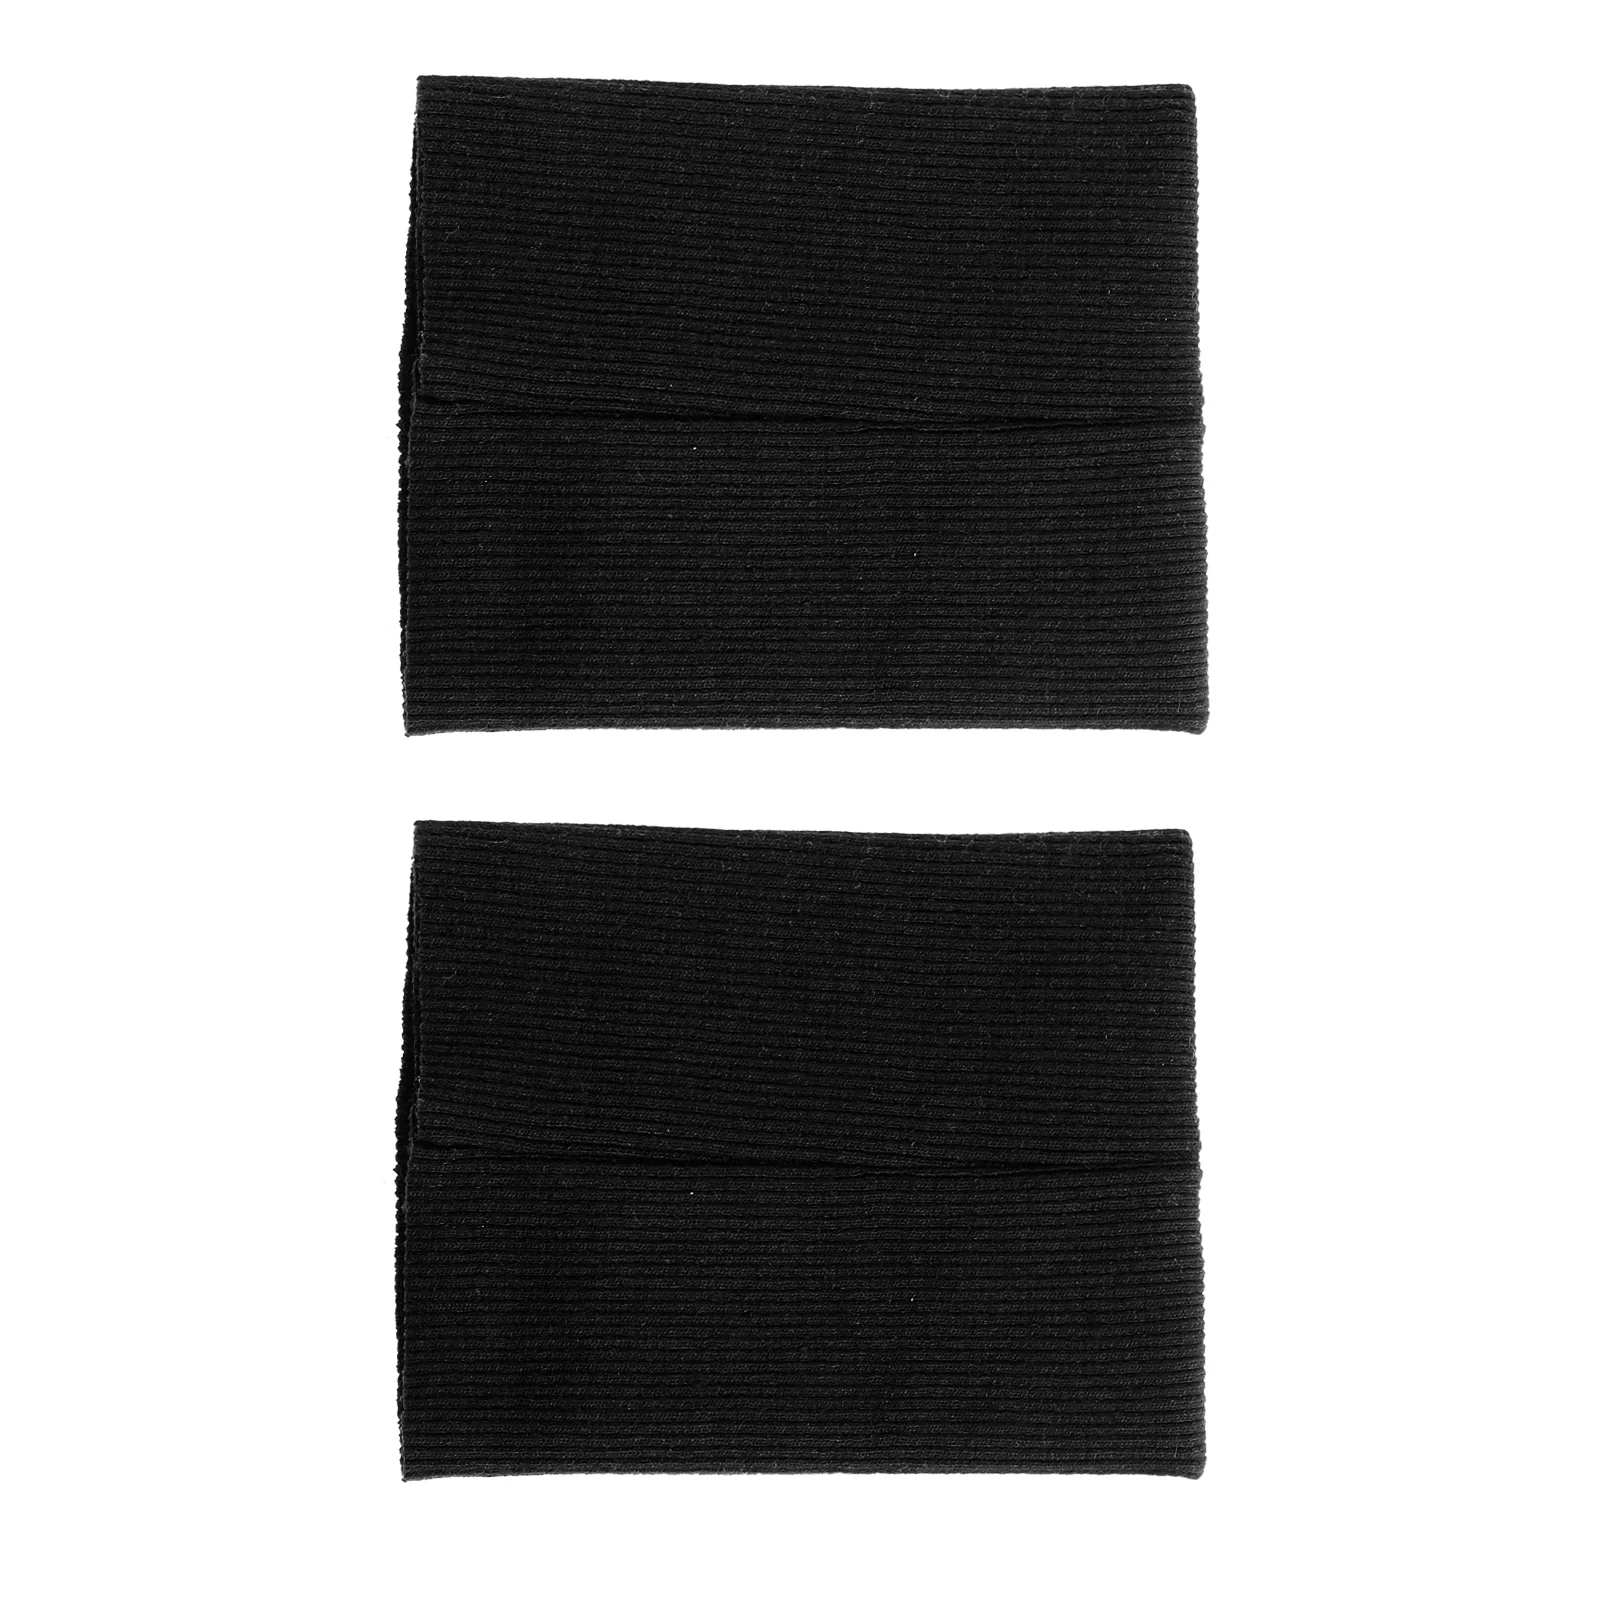 

Stretchy Cuffs Wrist A Jacket Knitted Tops Women Sleeves Extender Womens Winter Elastic Fabric Bands Ribbed Trims Waist